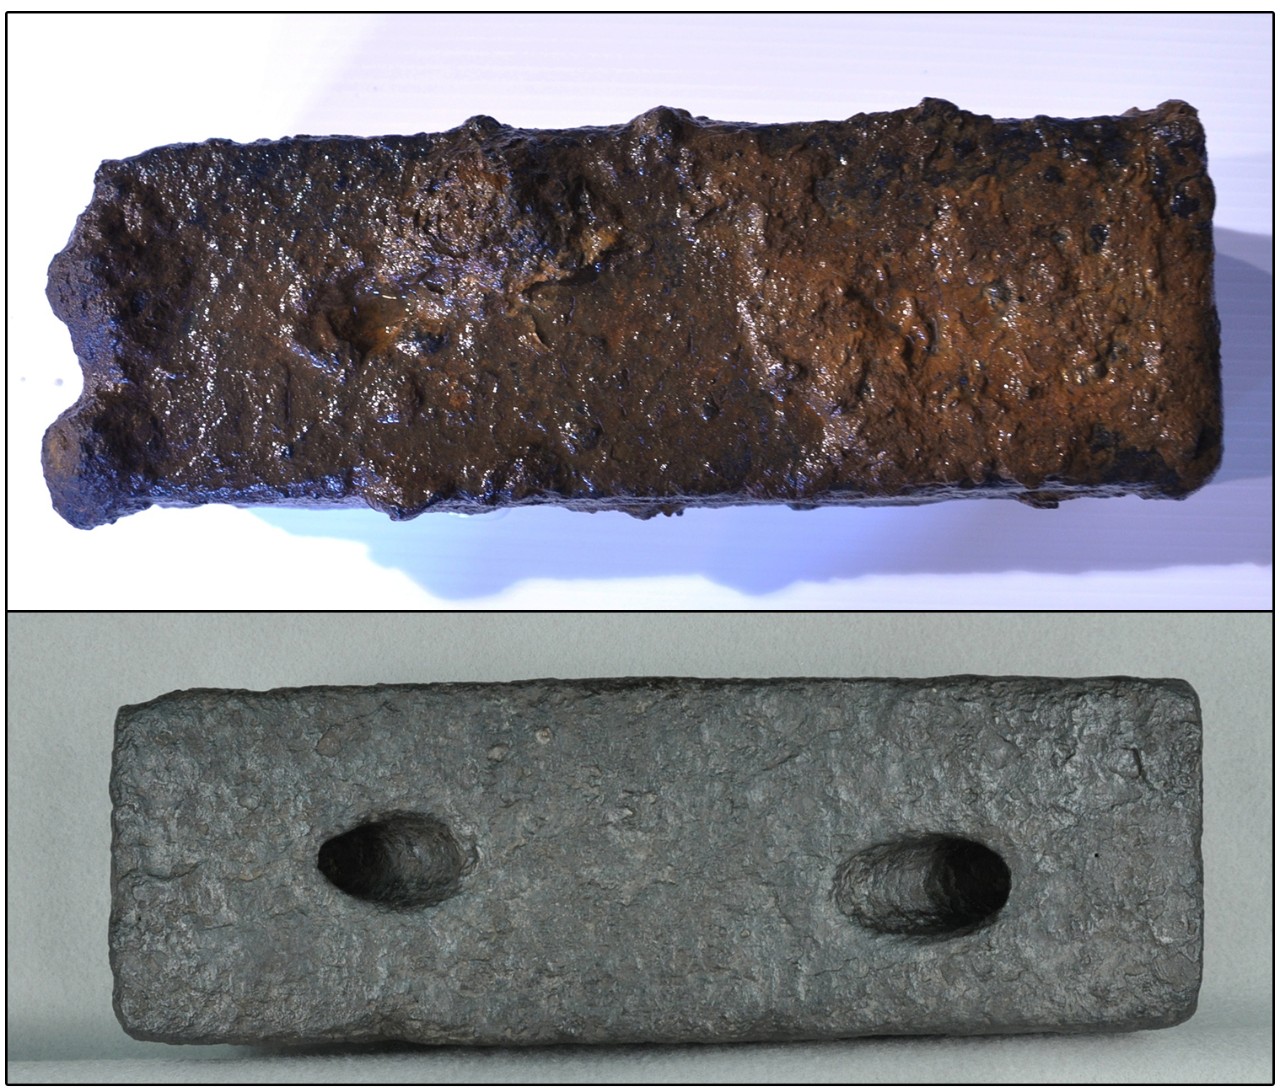 Two color photos of a solid iron retangular block. The top image shows the block covered in hard thick orange/red layers of concretion; the bottom image shows the block with a smooth, black surface with two oval through holes. 